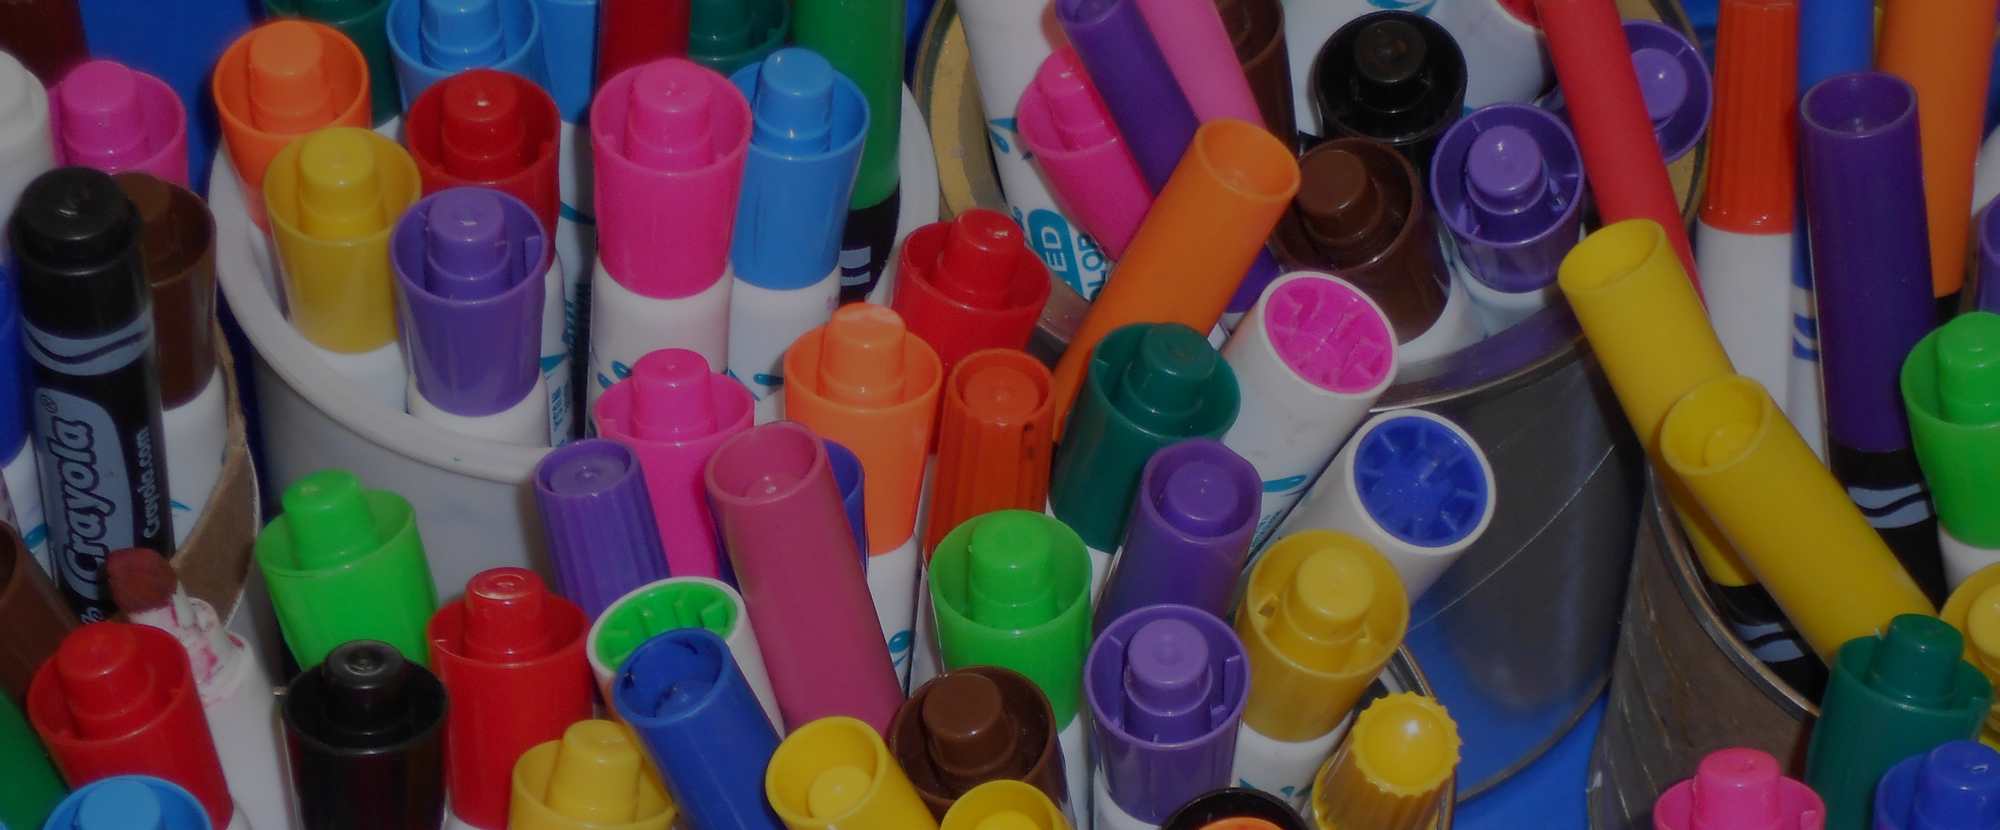 assortment of colored markers